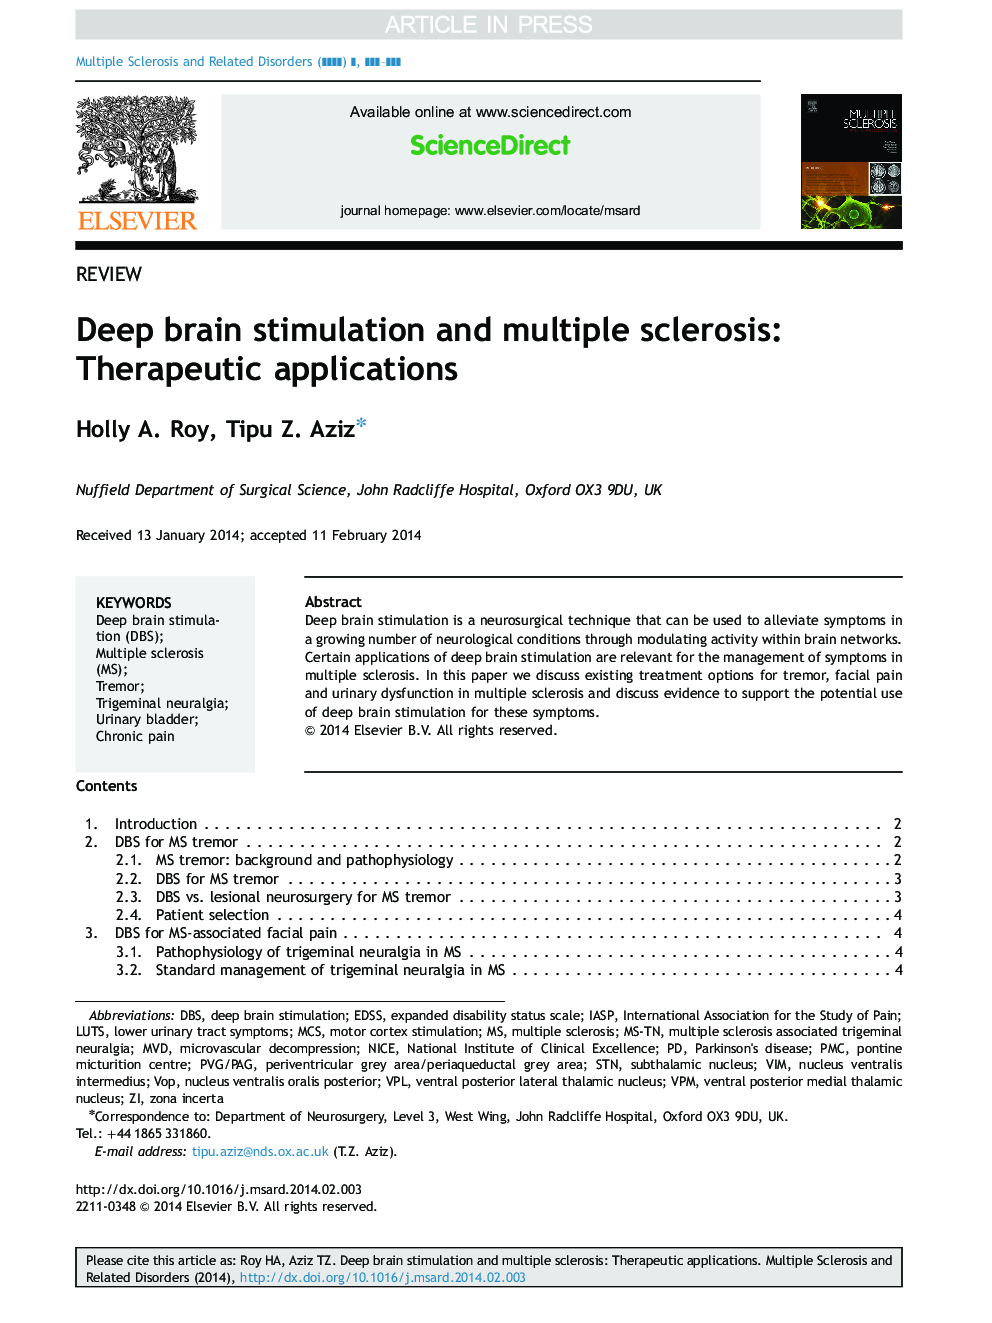 Deep brain stimulation and multiple sclerosis: Therapeutic applications